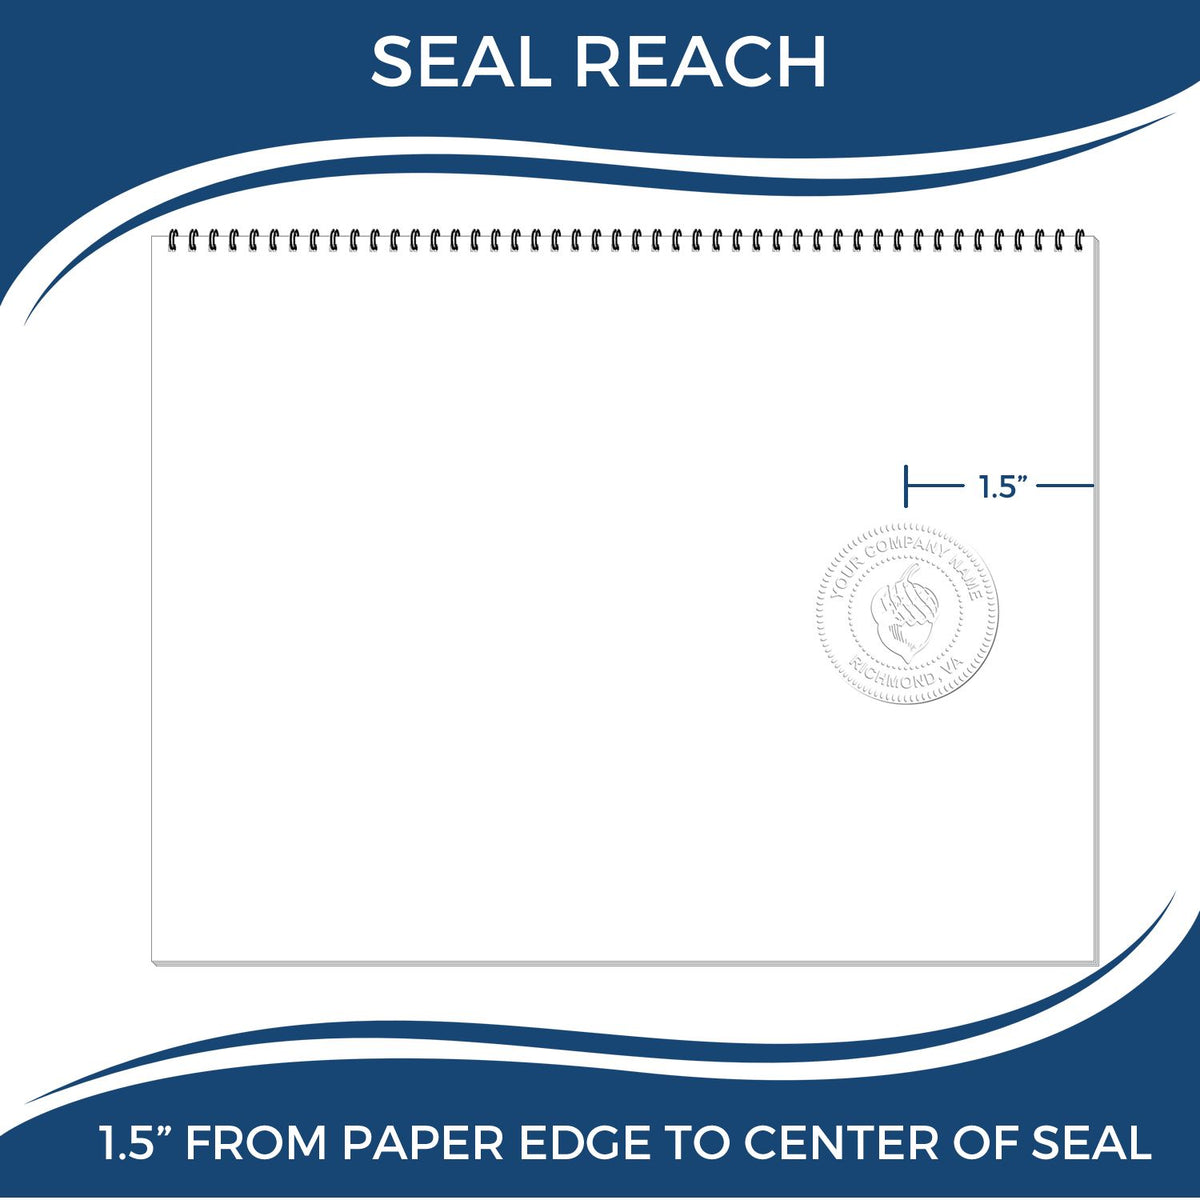 An infographic showing the seal reach which is represented by a ruler and a miniature seal image of the State of Maine Soft Land Surveyor Embossing Seal